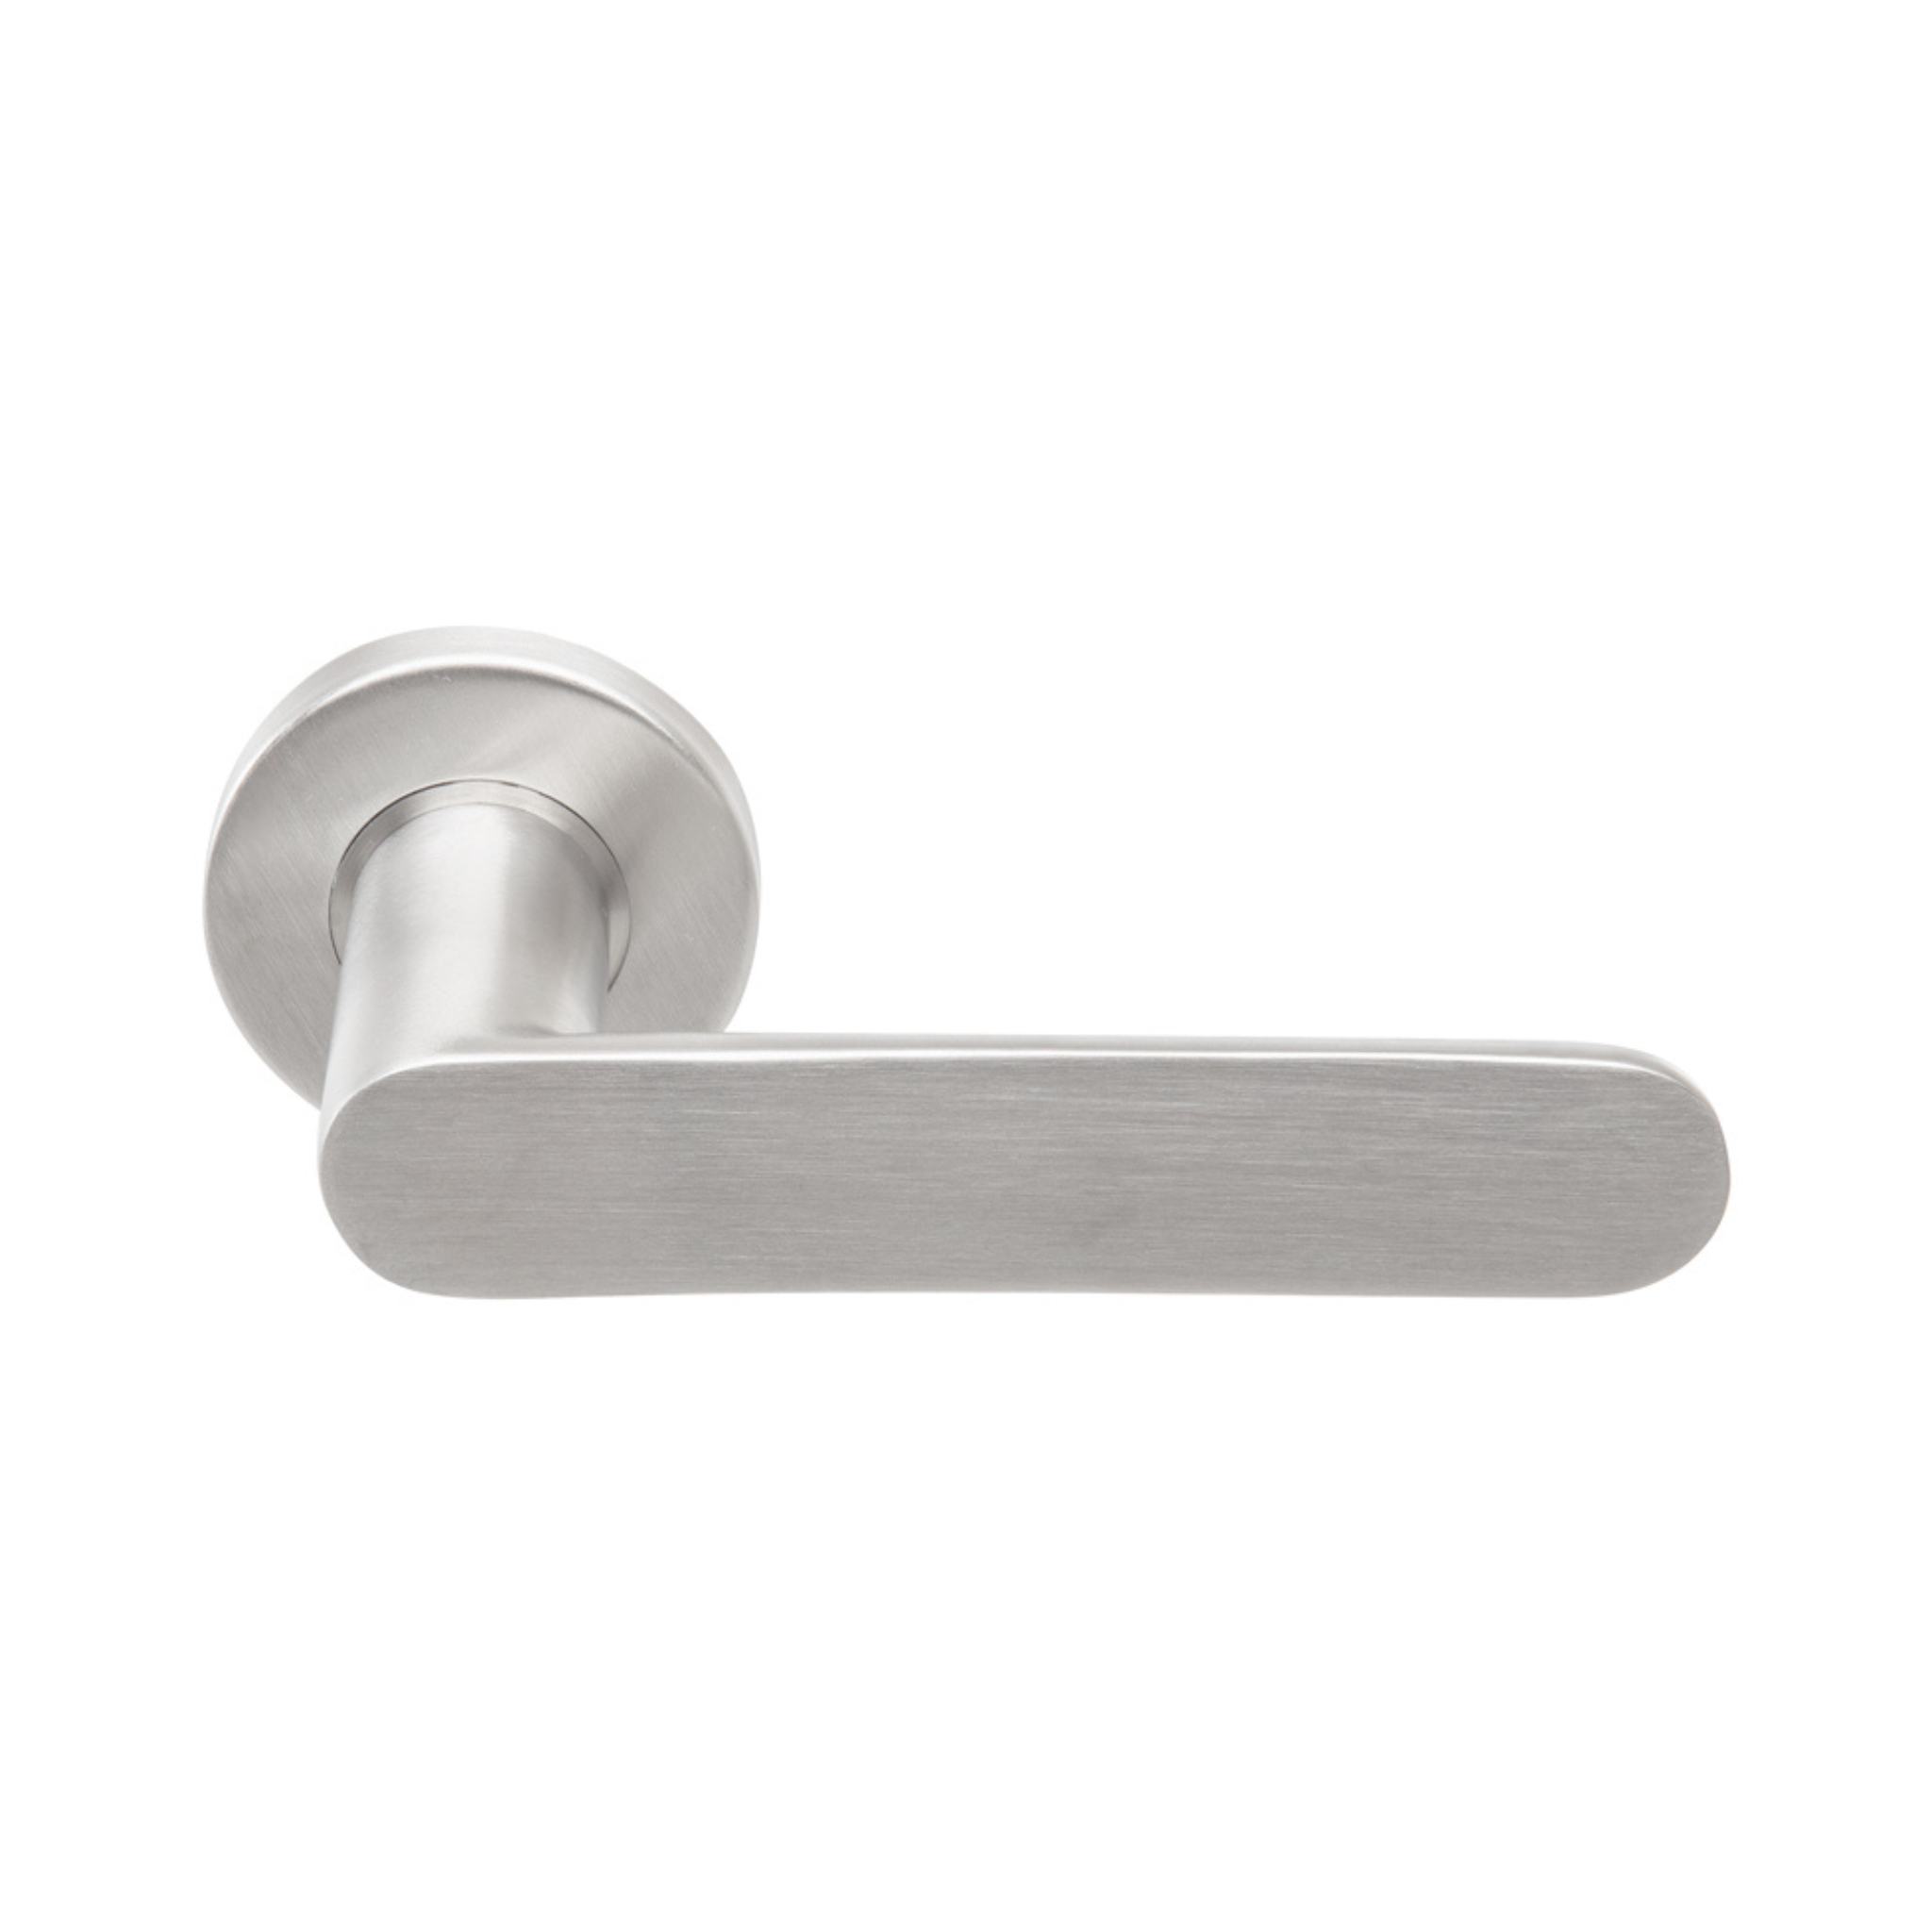 TH 132, Lever Handles, Tubular, On Round Rose, With Escutcheons, 140mm (l), Stainless Steel, DORMAKABA